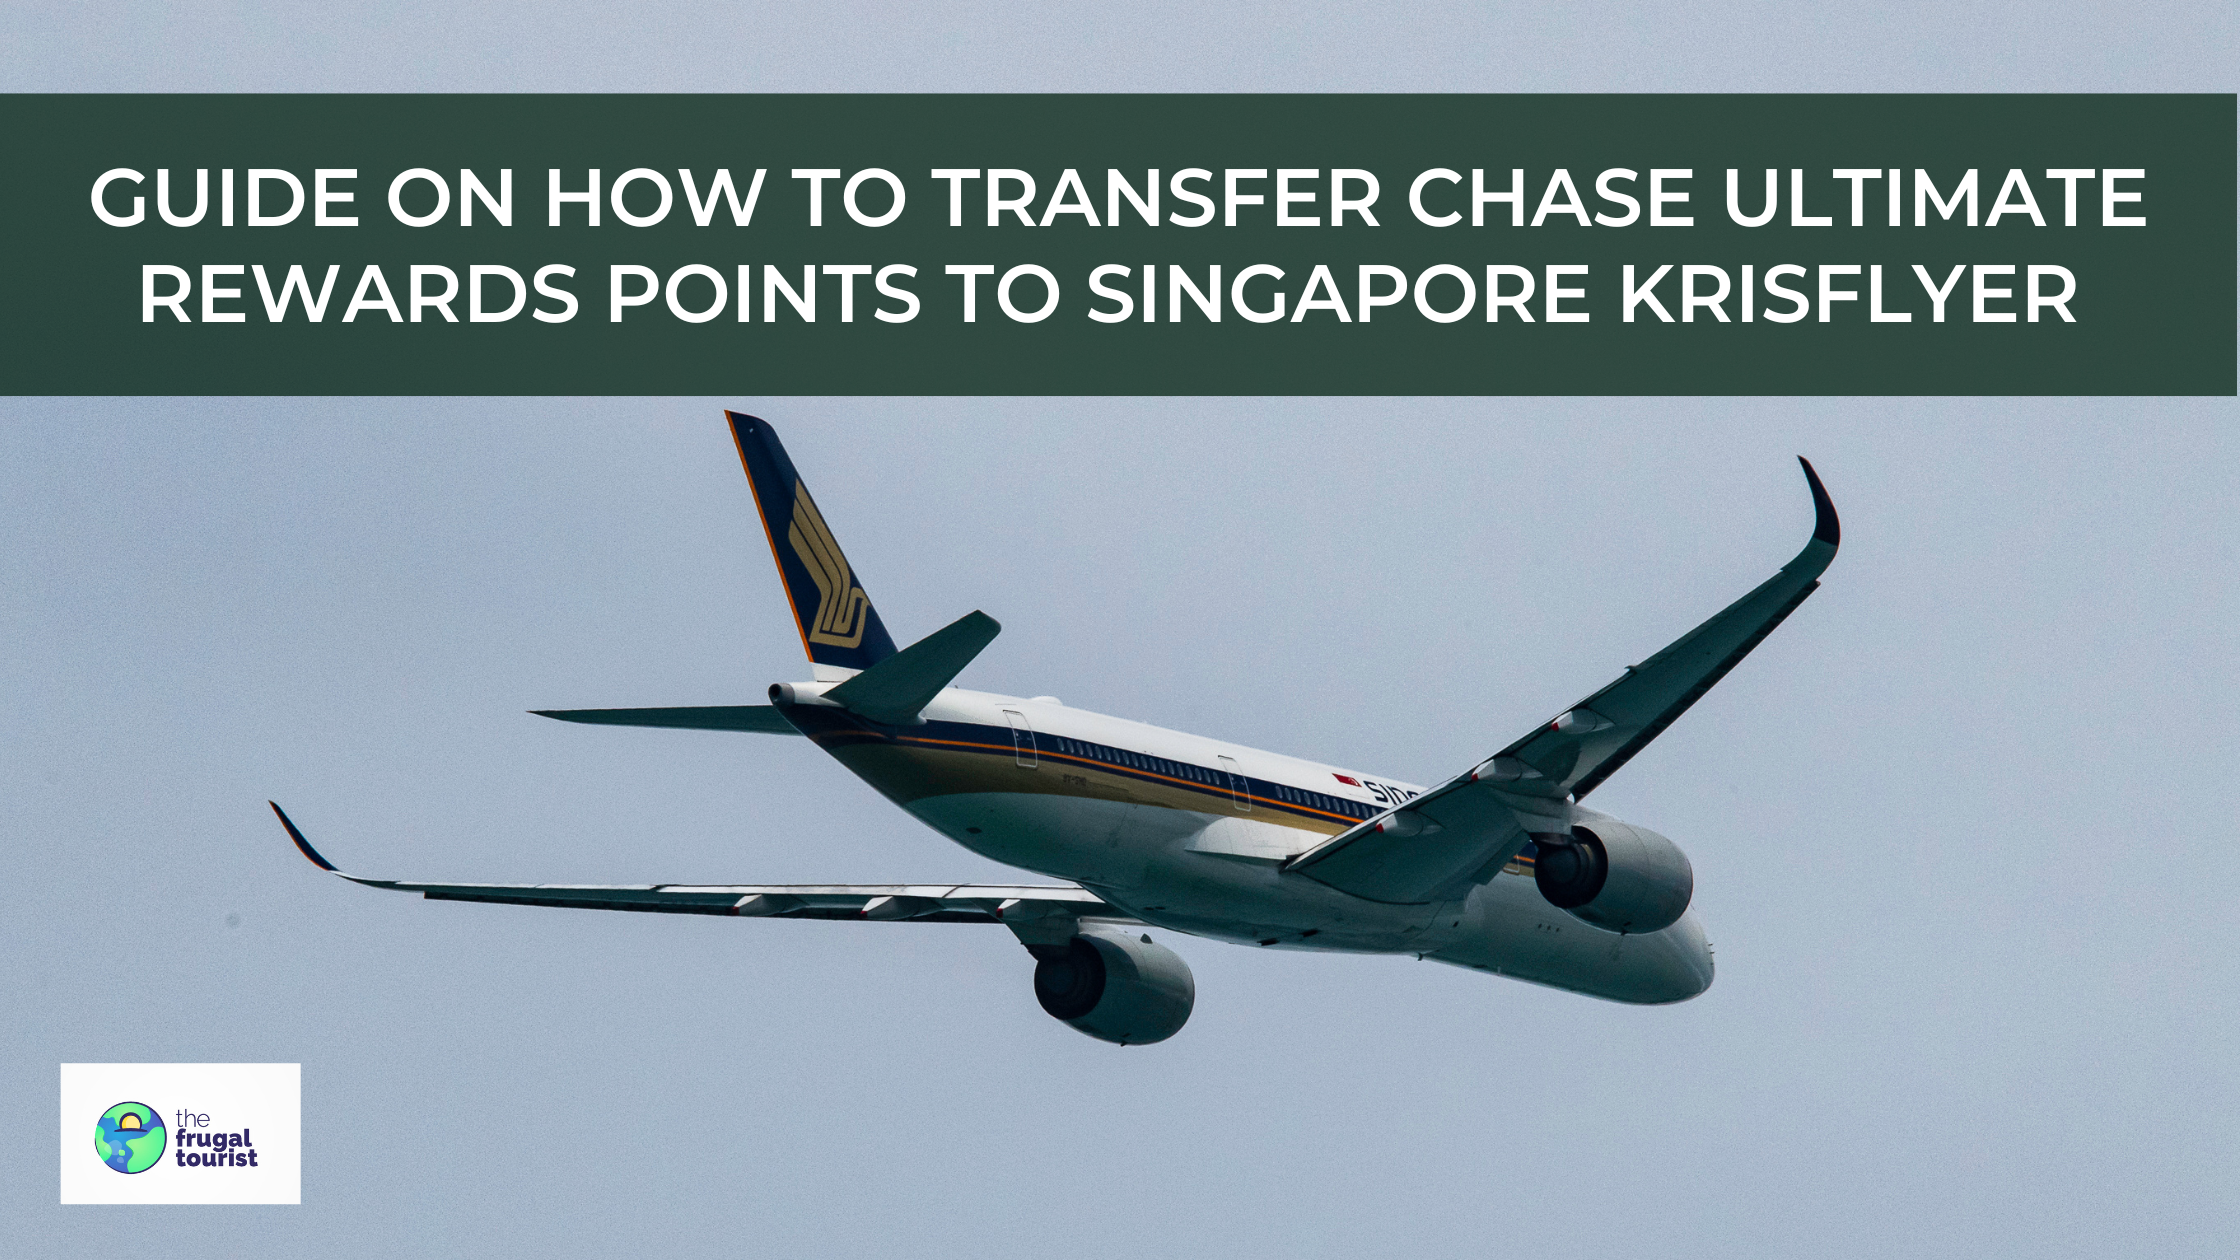 Guide on How to Transfer Chase Ultimate Rewards Points to Singapore KrisFlyer